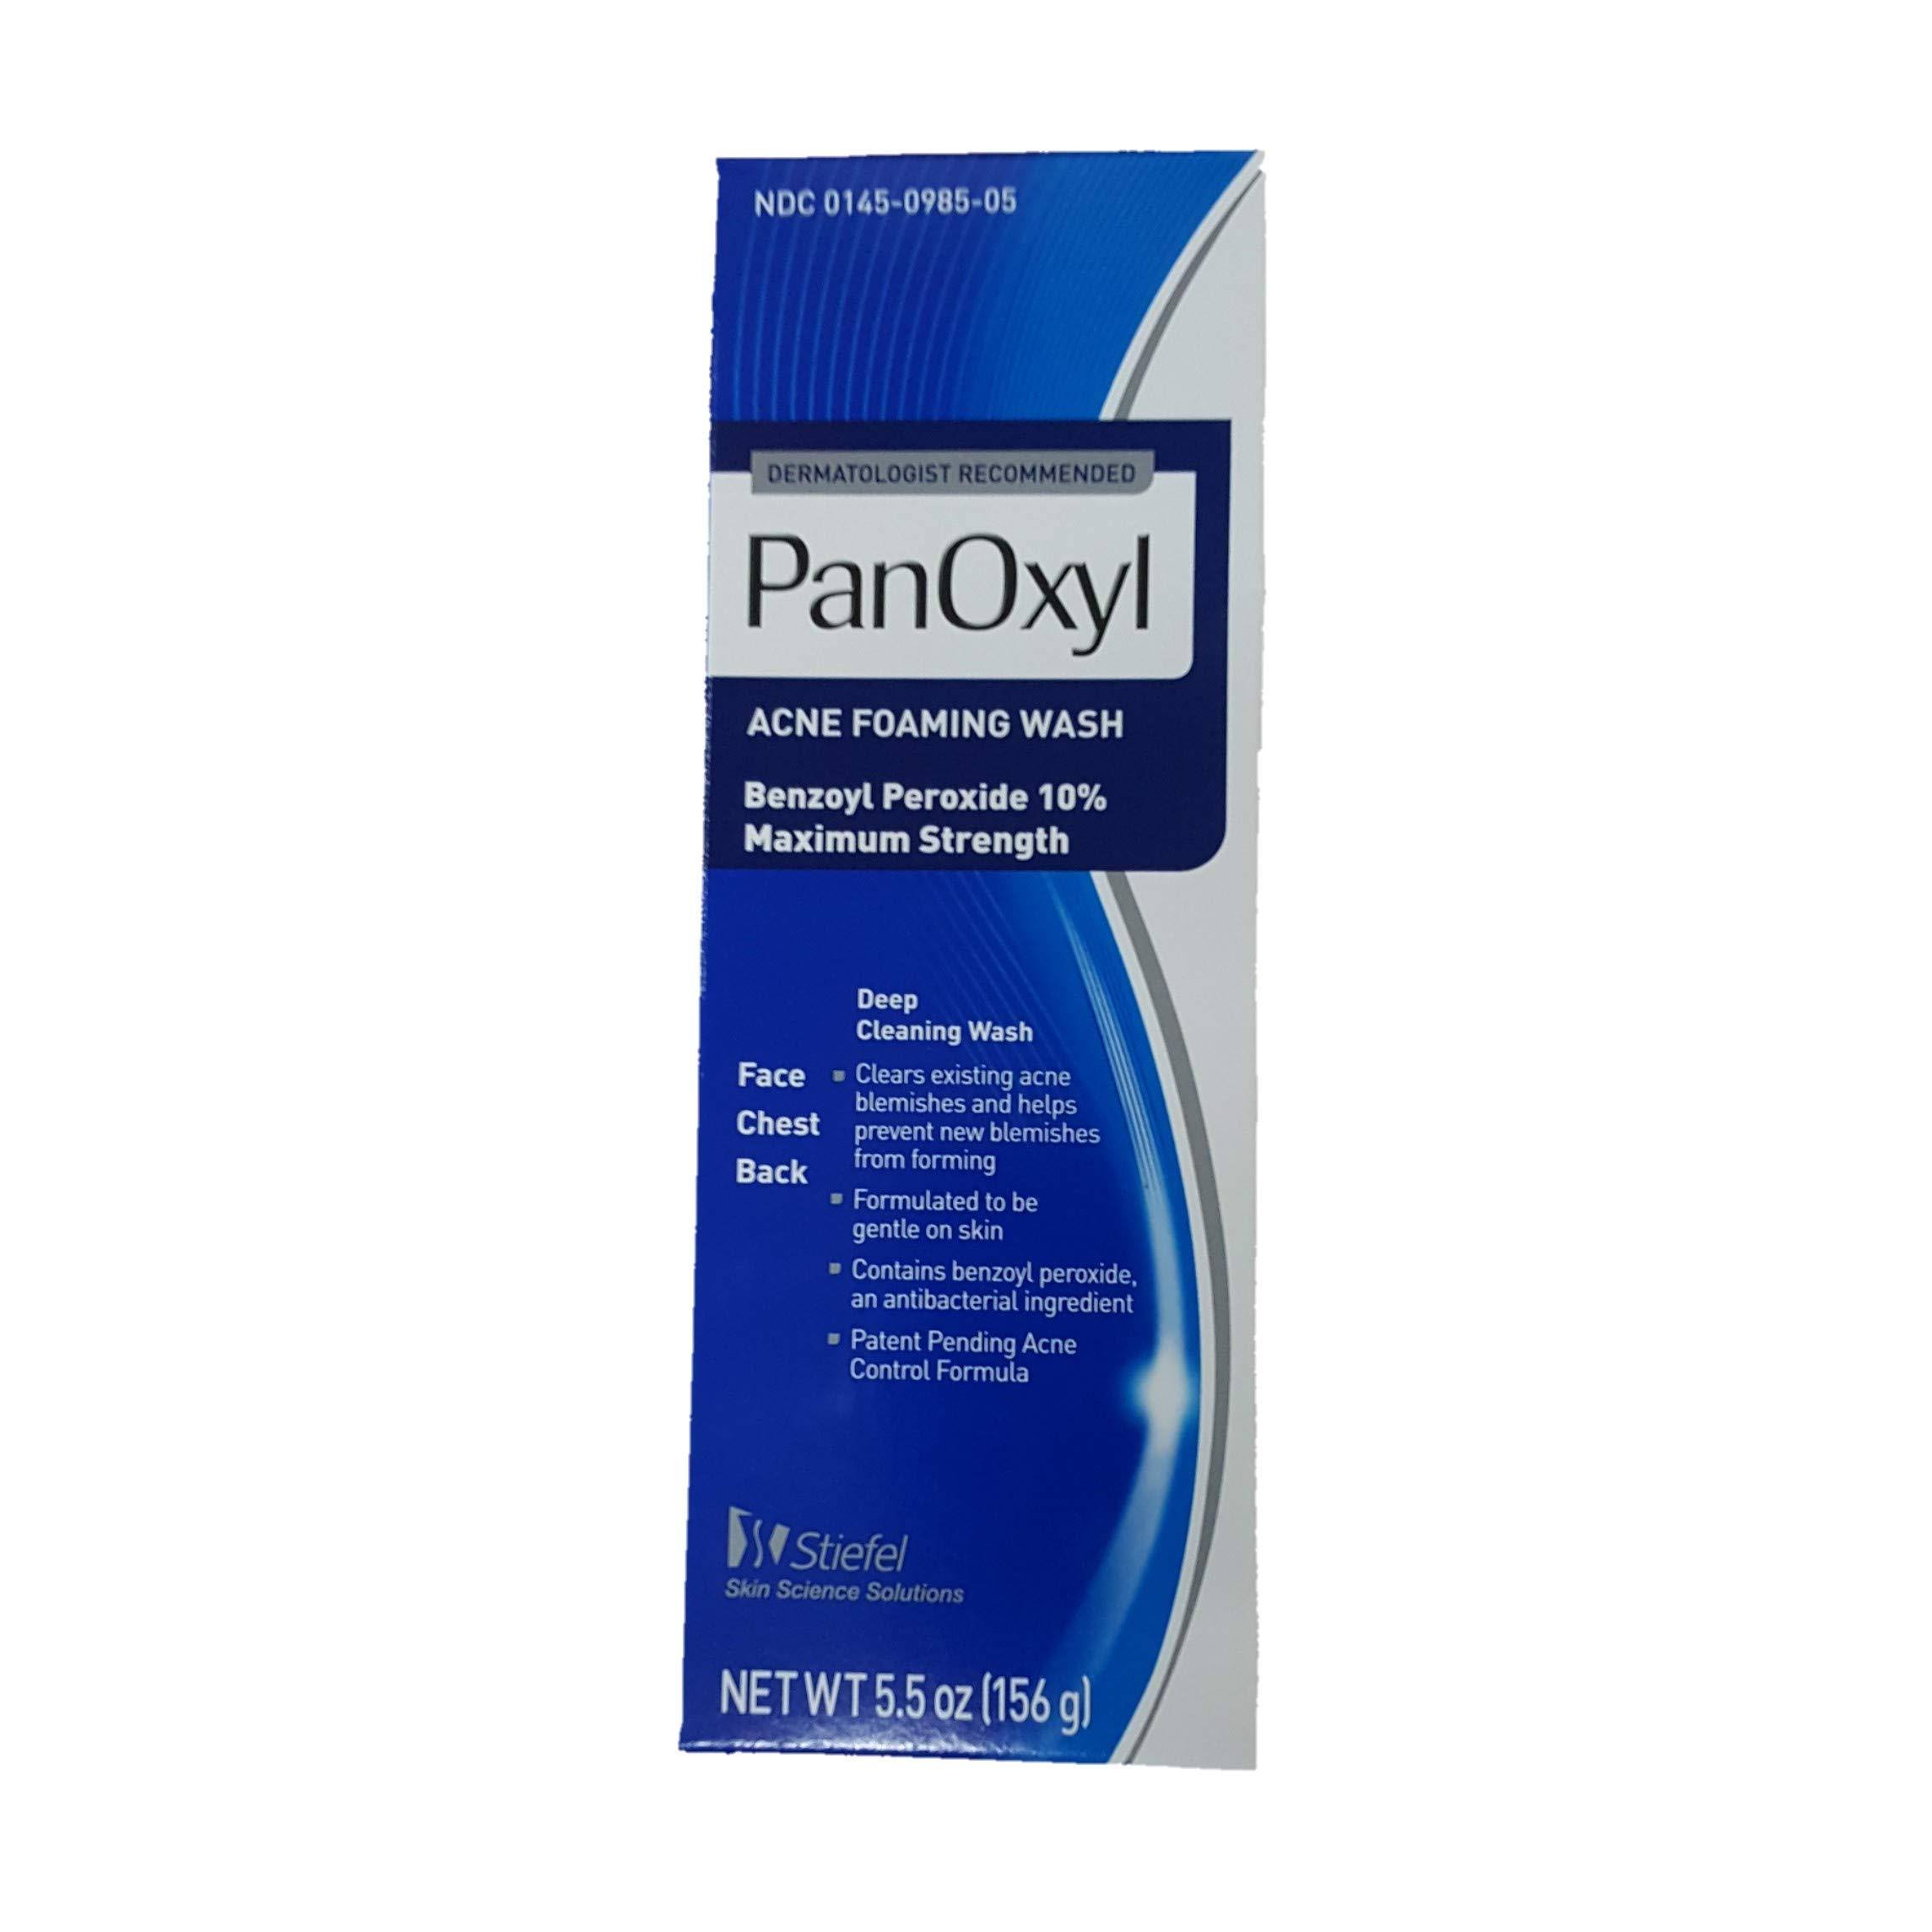 Panoxyl Acne Foaming Wash - 156g